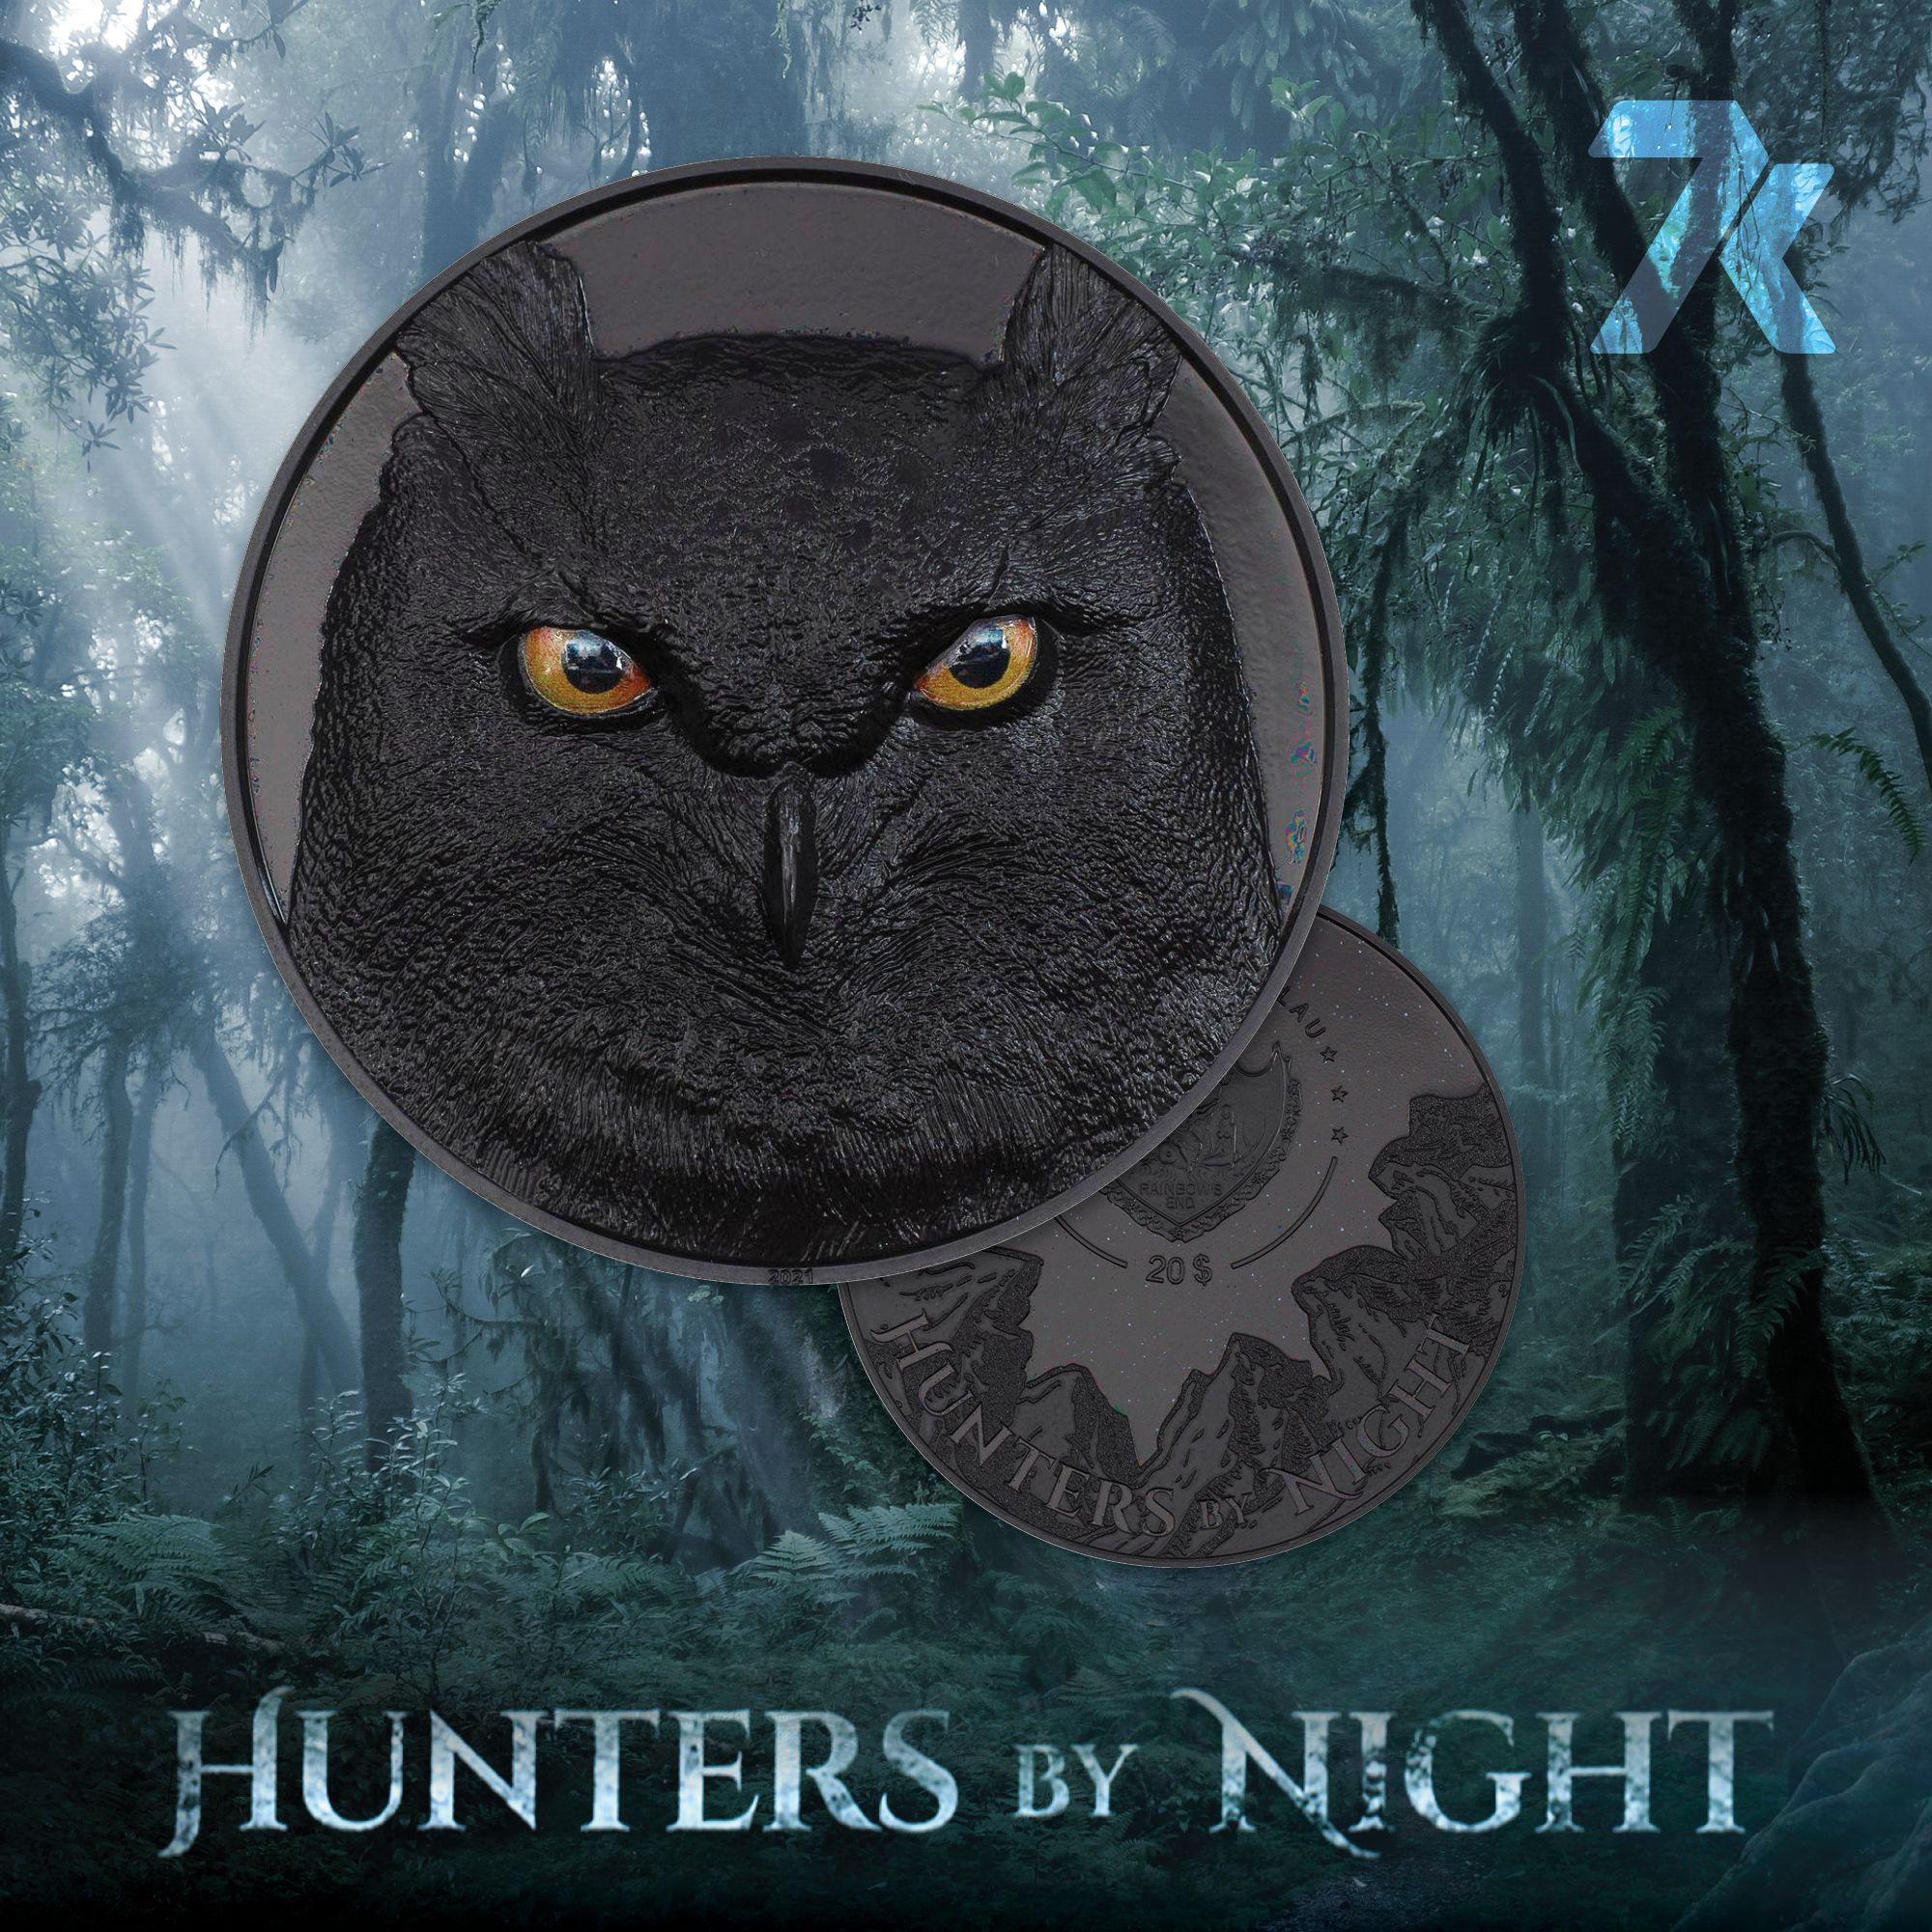 2021 Hunters By Night Eagle Owl 5oz Obsidian Black Proof Silver Coin